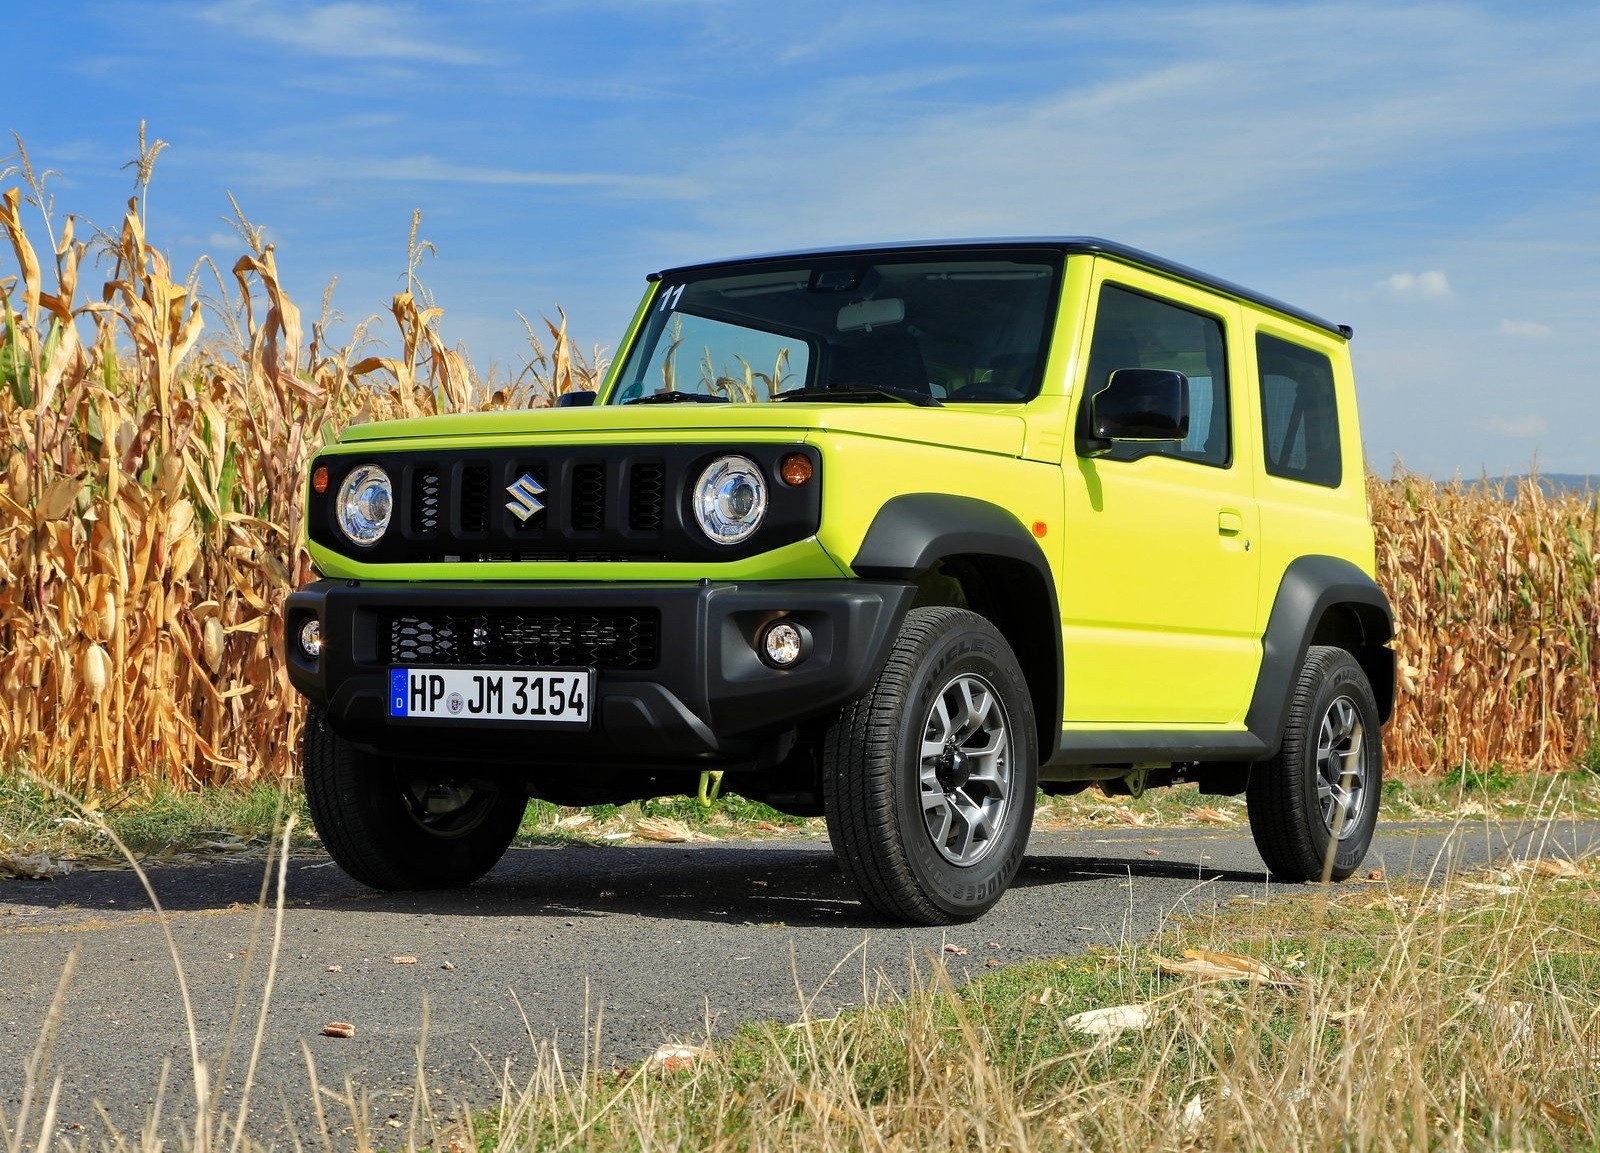 Suzuki now makes Jimny in India. Could PH source the off-roader there?